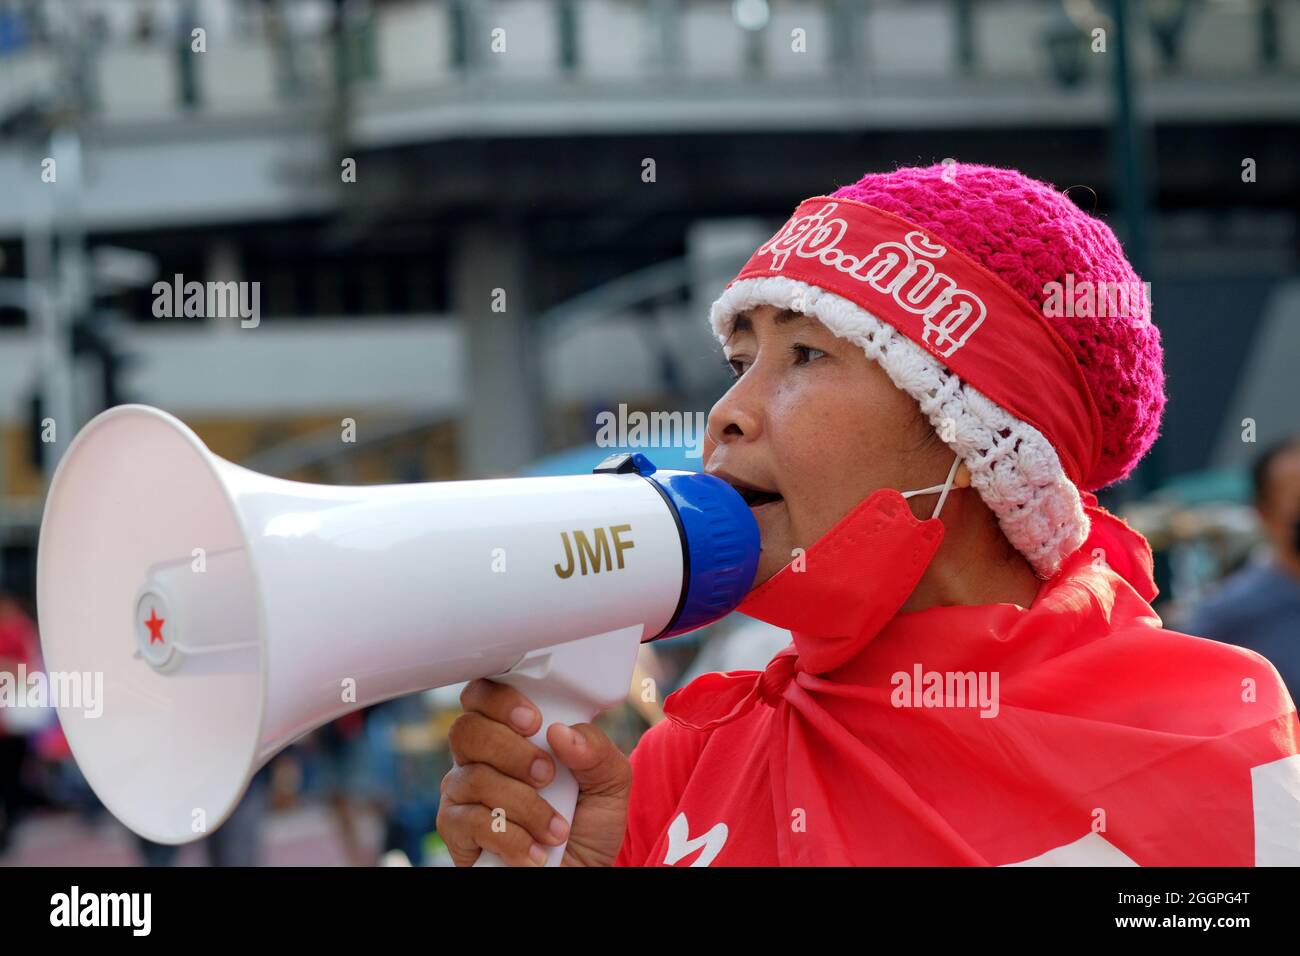 Bangkok, Thailand, 2 September 2021, a female supporter of the United Front for Democracy Against Dictatorship (UDD) shouts with a megaphone alongside other protestors to demand the resignation of Thailand's Prime Minister General Prayut Chan-ocha. Today's protest closed the north-south carriageways of the Asoke road junction in central Bangkok, and restricted traffic along the Sukhumvit Road. Today's event was part of an on-going series of protests across the country to voice disaffection with the current government's performance during the COVID pandemic. Stock Photo